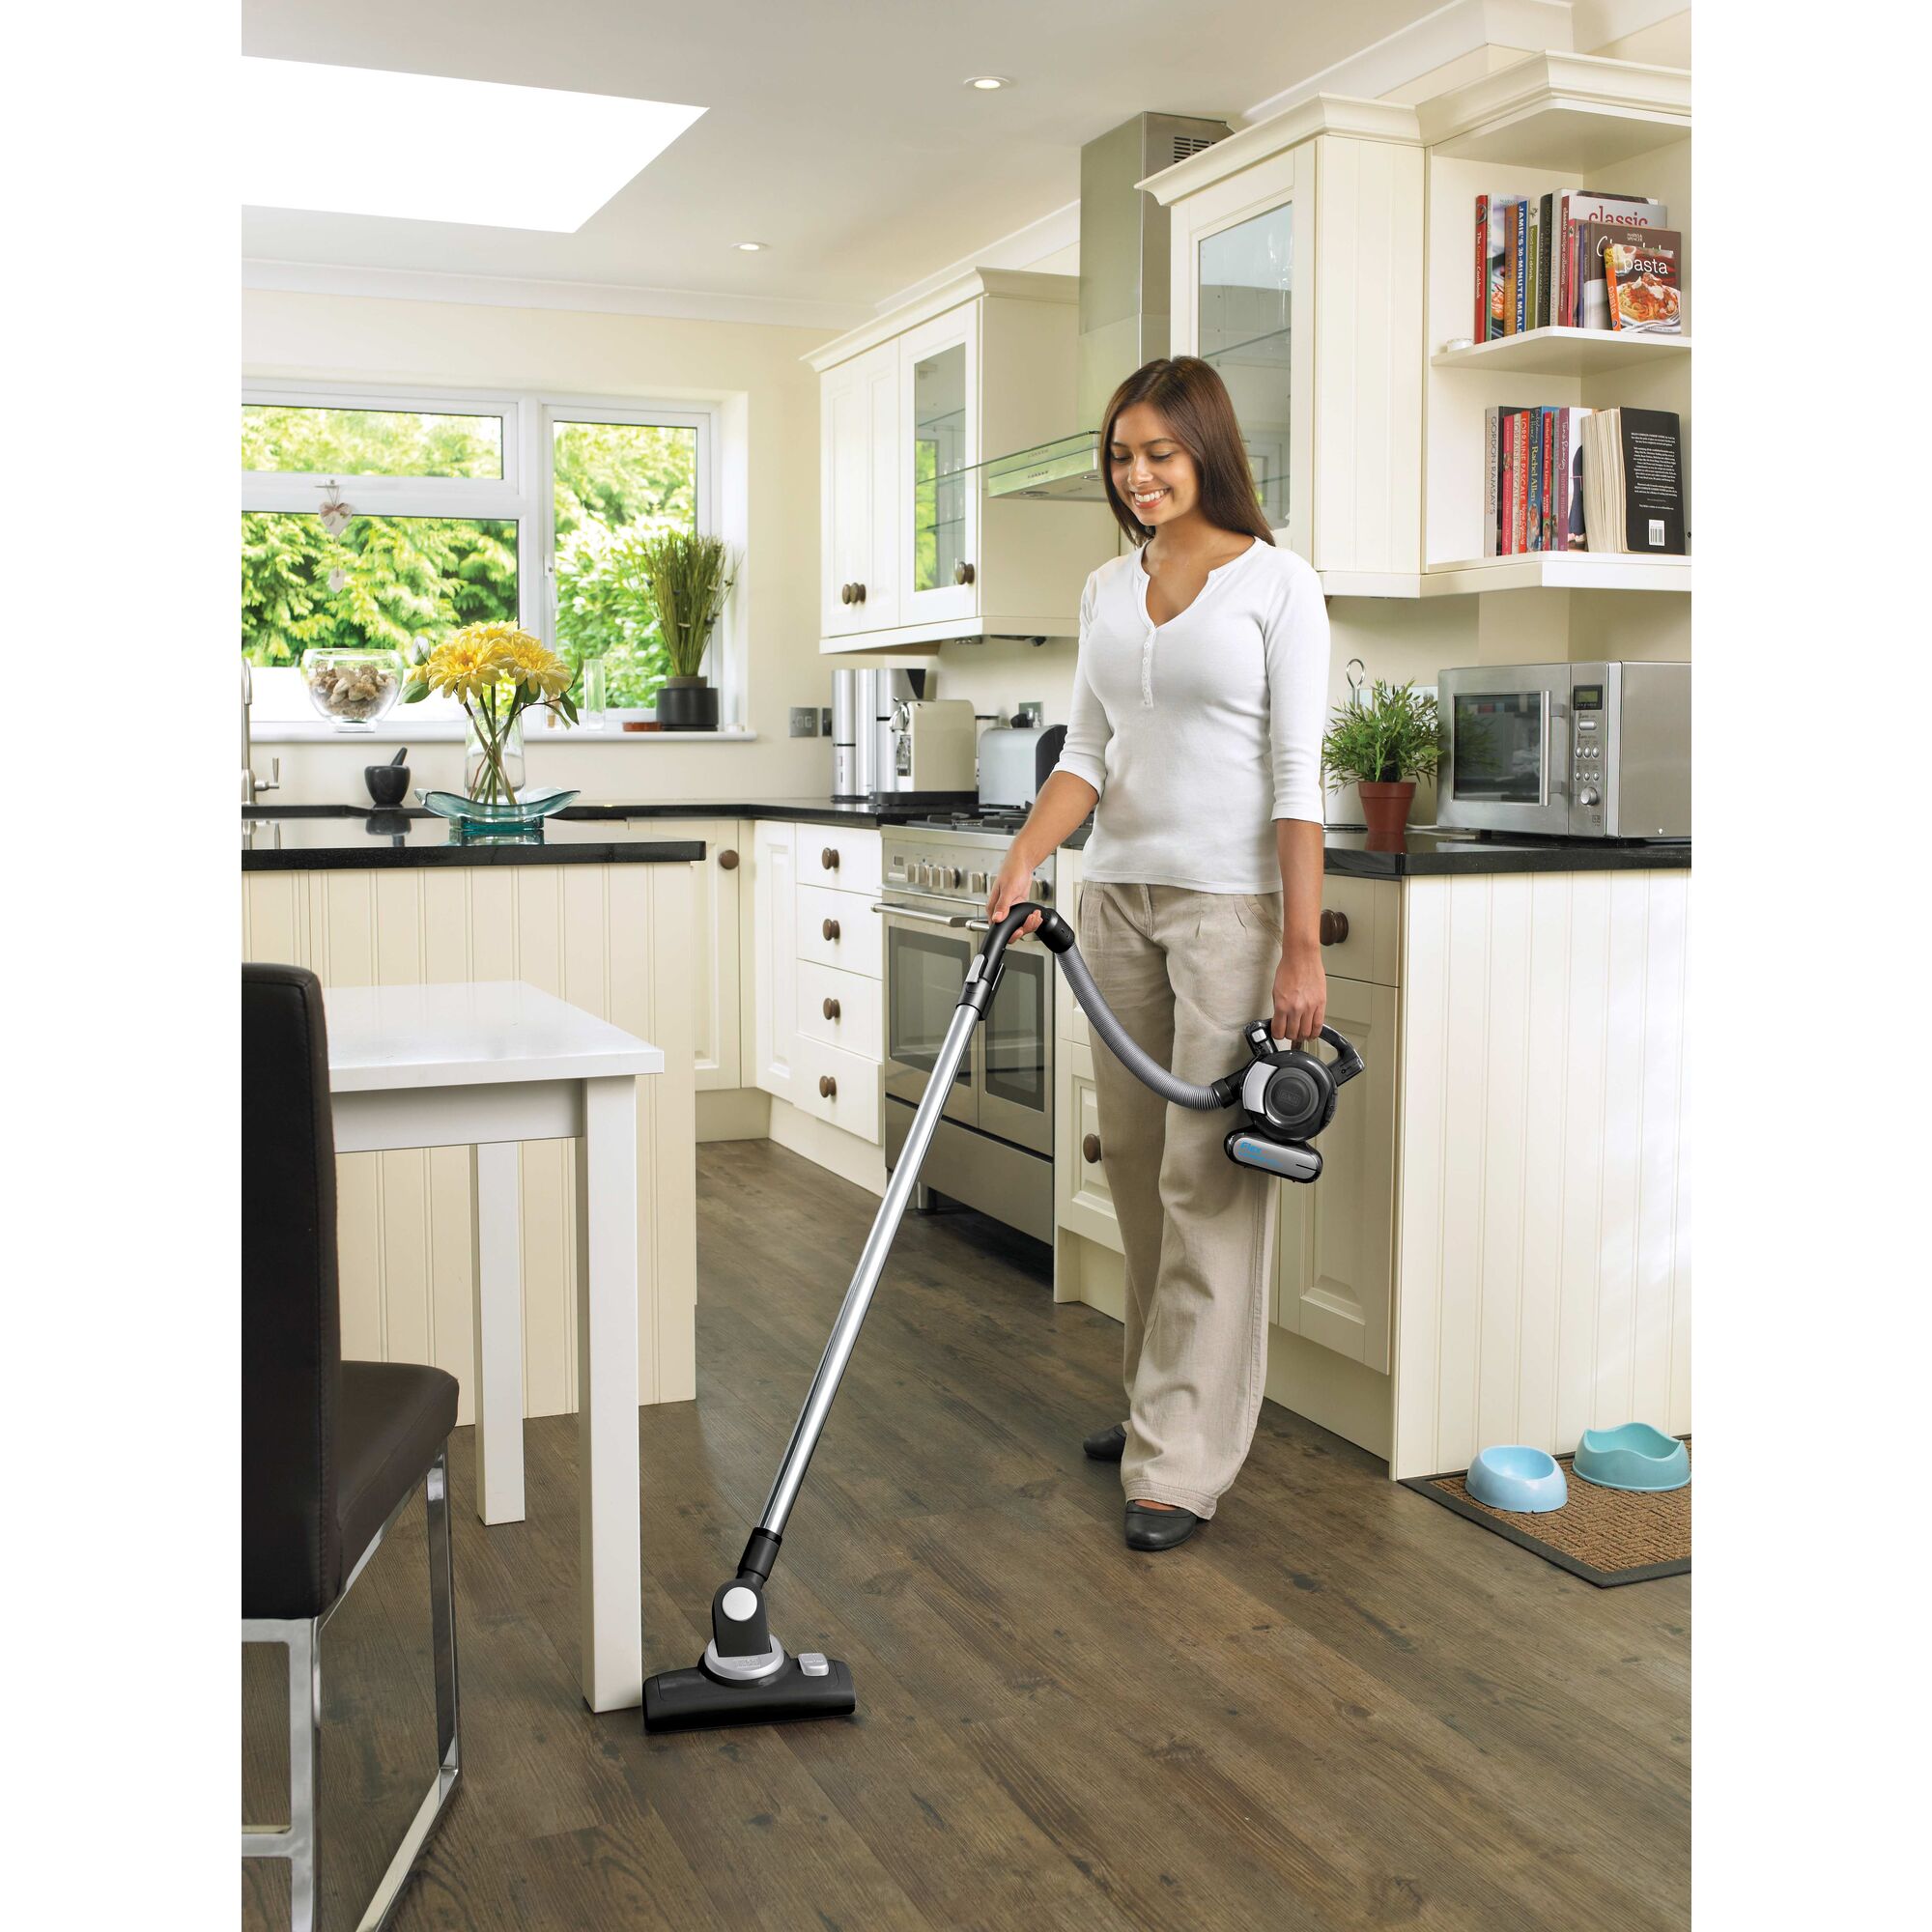 Dustbuster flex cordless hand vacuum with floor head and pet hair brush being used by a person.